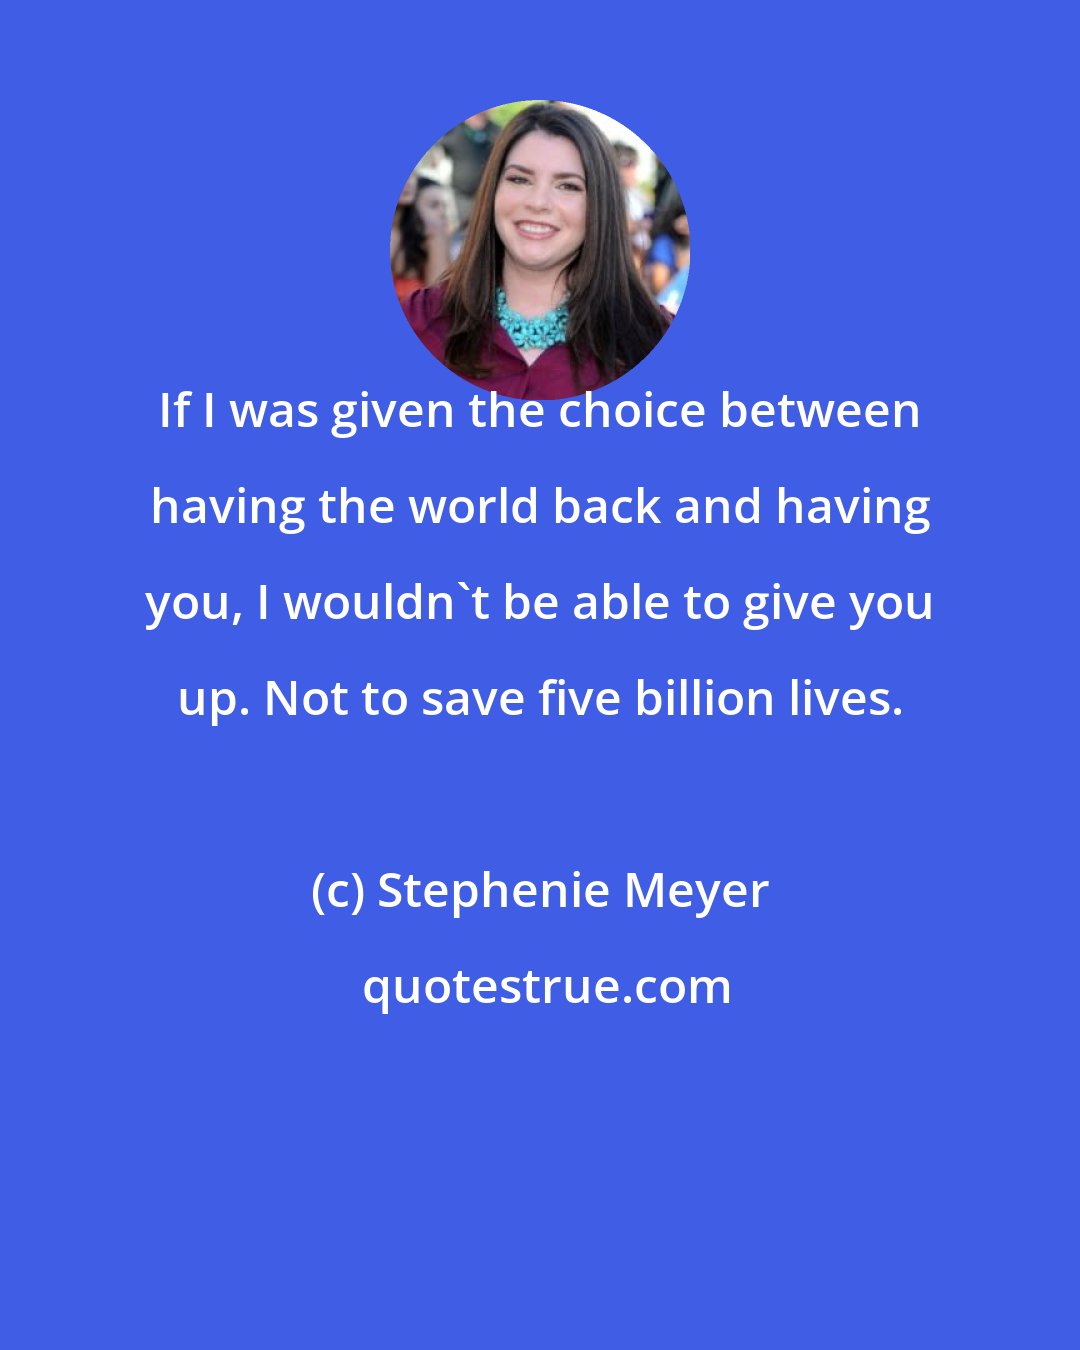 Stephenie Meyer: If I was given the choice between having the world back and having you, I wouldn't be able to give you up. Not to save five billion lives.